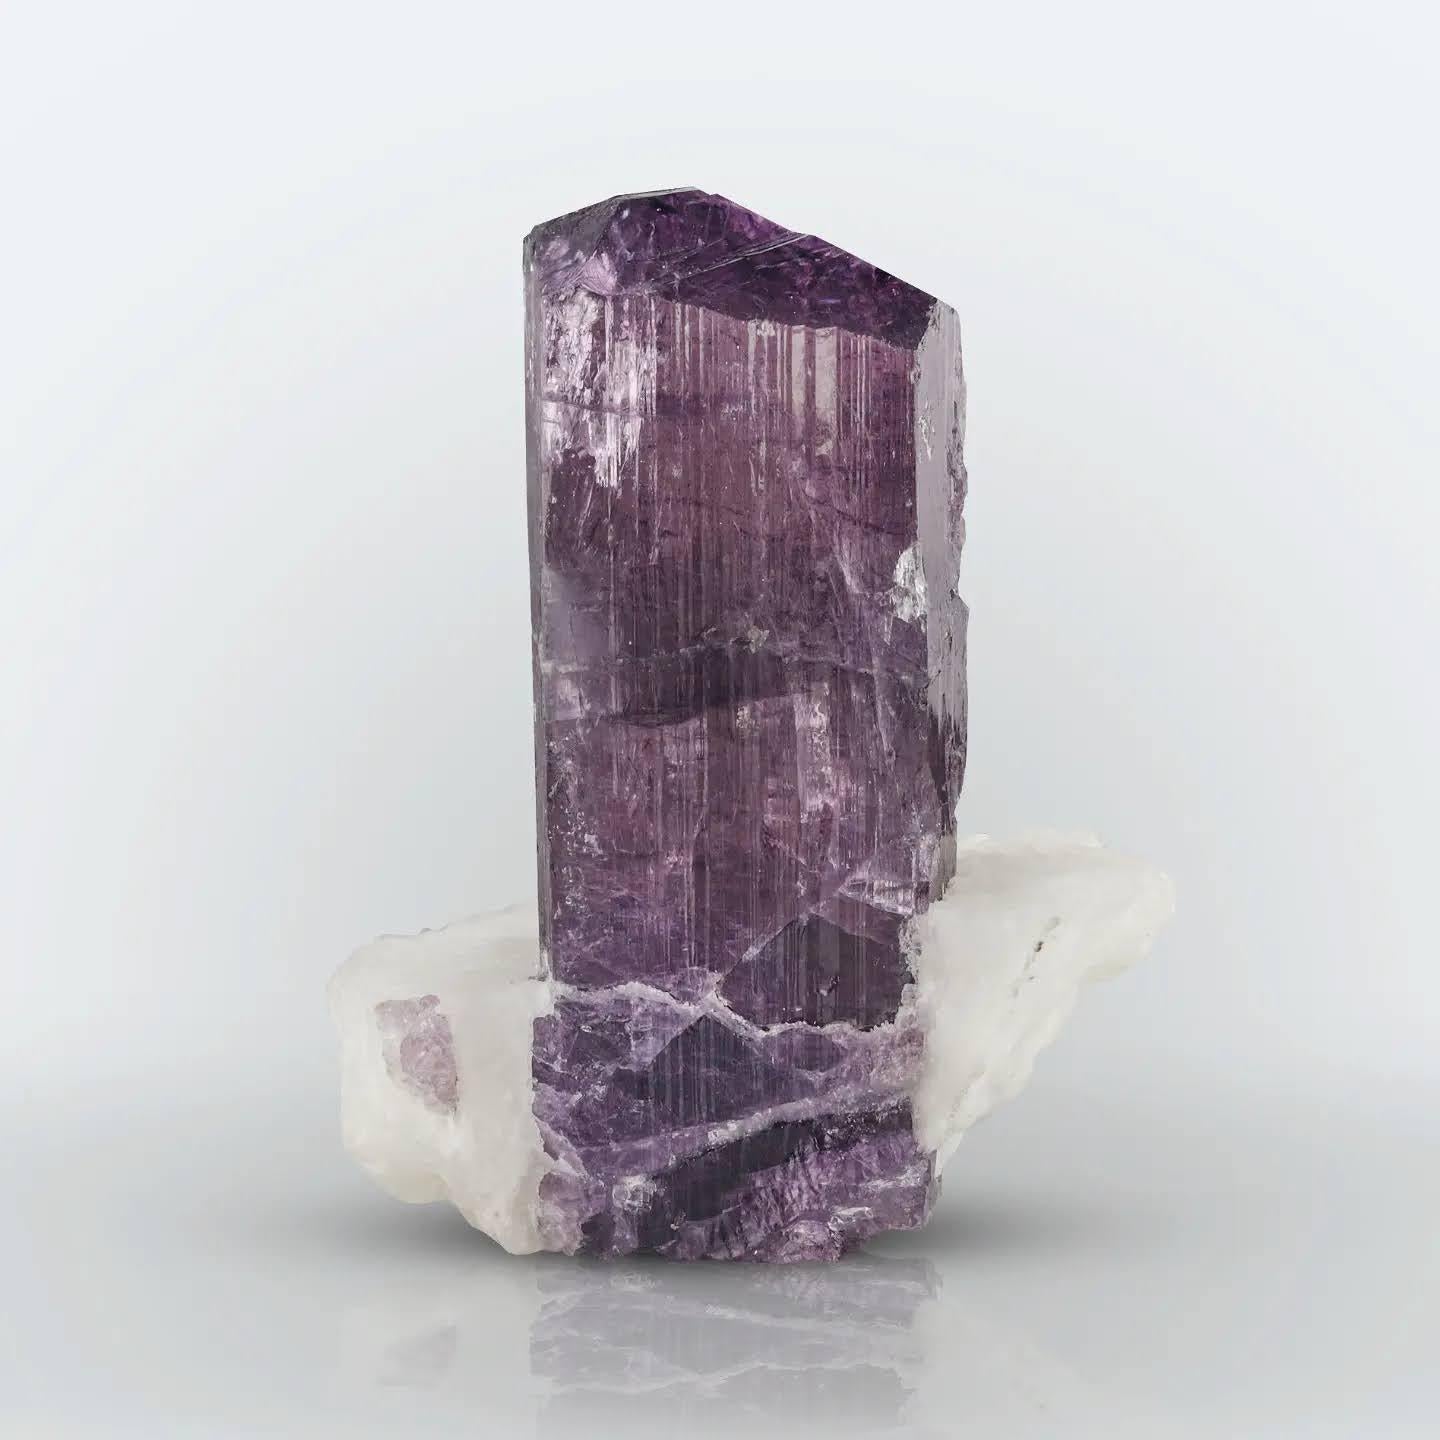 Uncut Vibrant Purple Color Scapolite Crystal On Calcite Matrix From Afghanistan For Sale